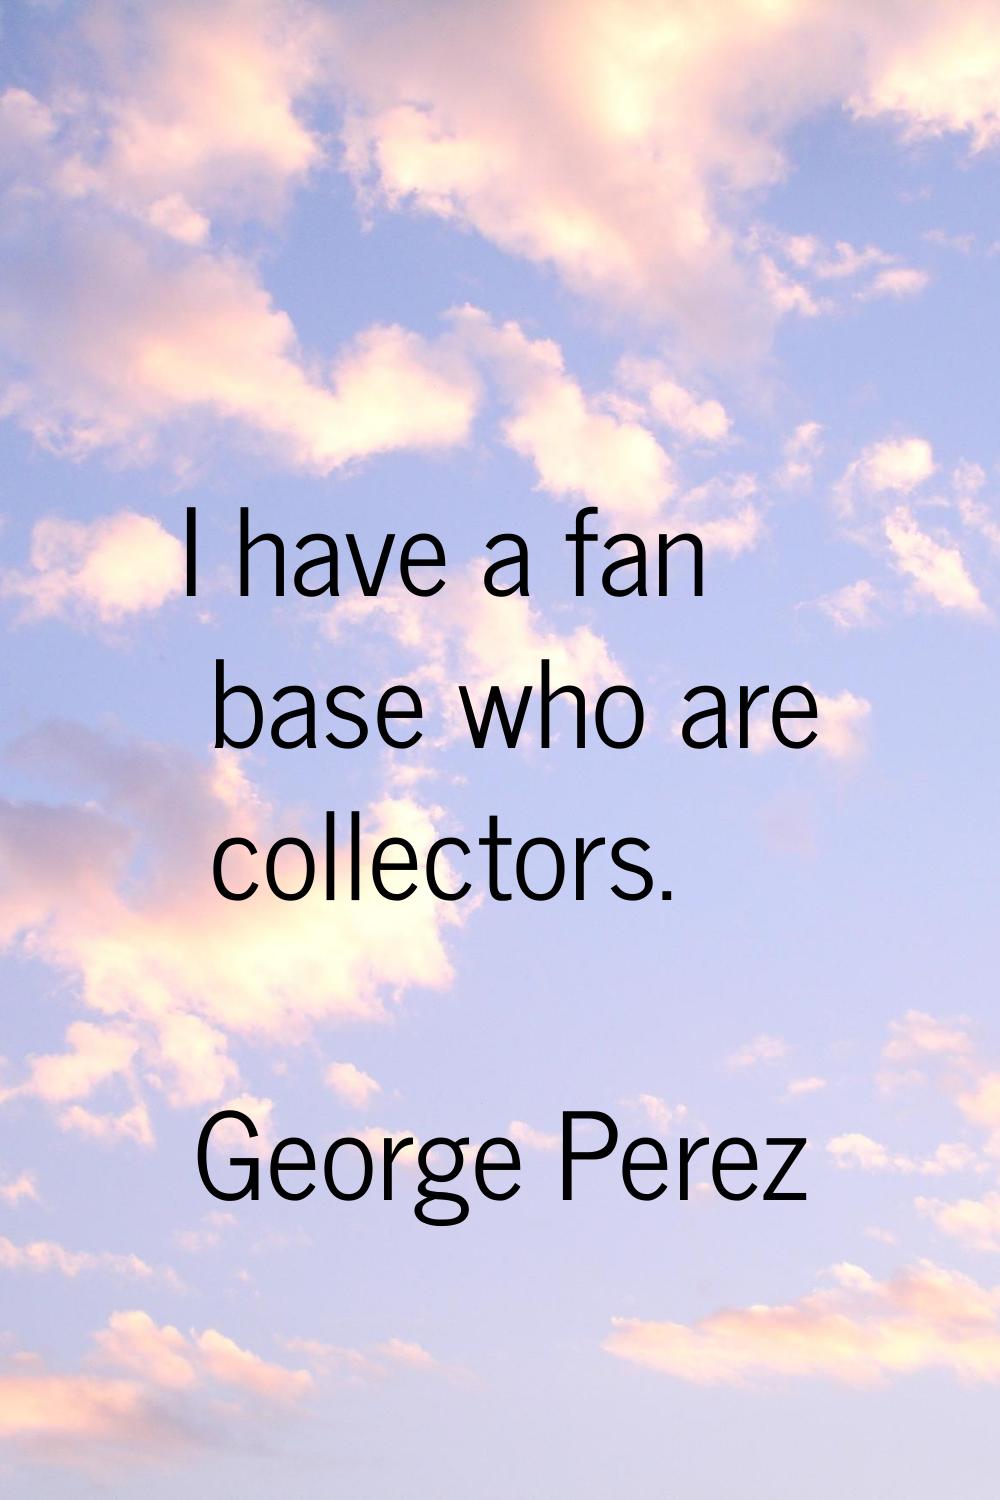 I have a fan base who are collectors.